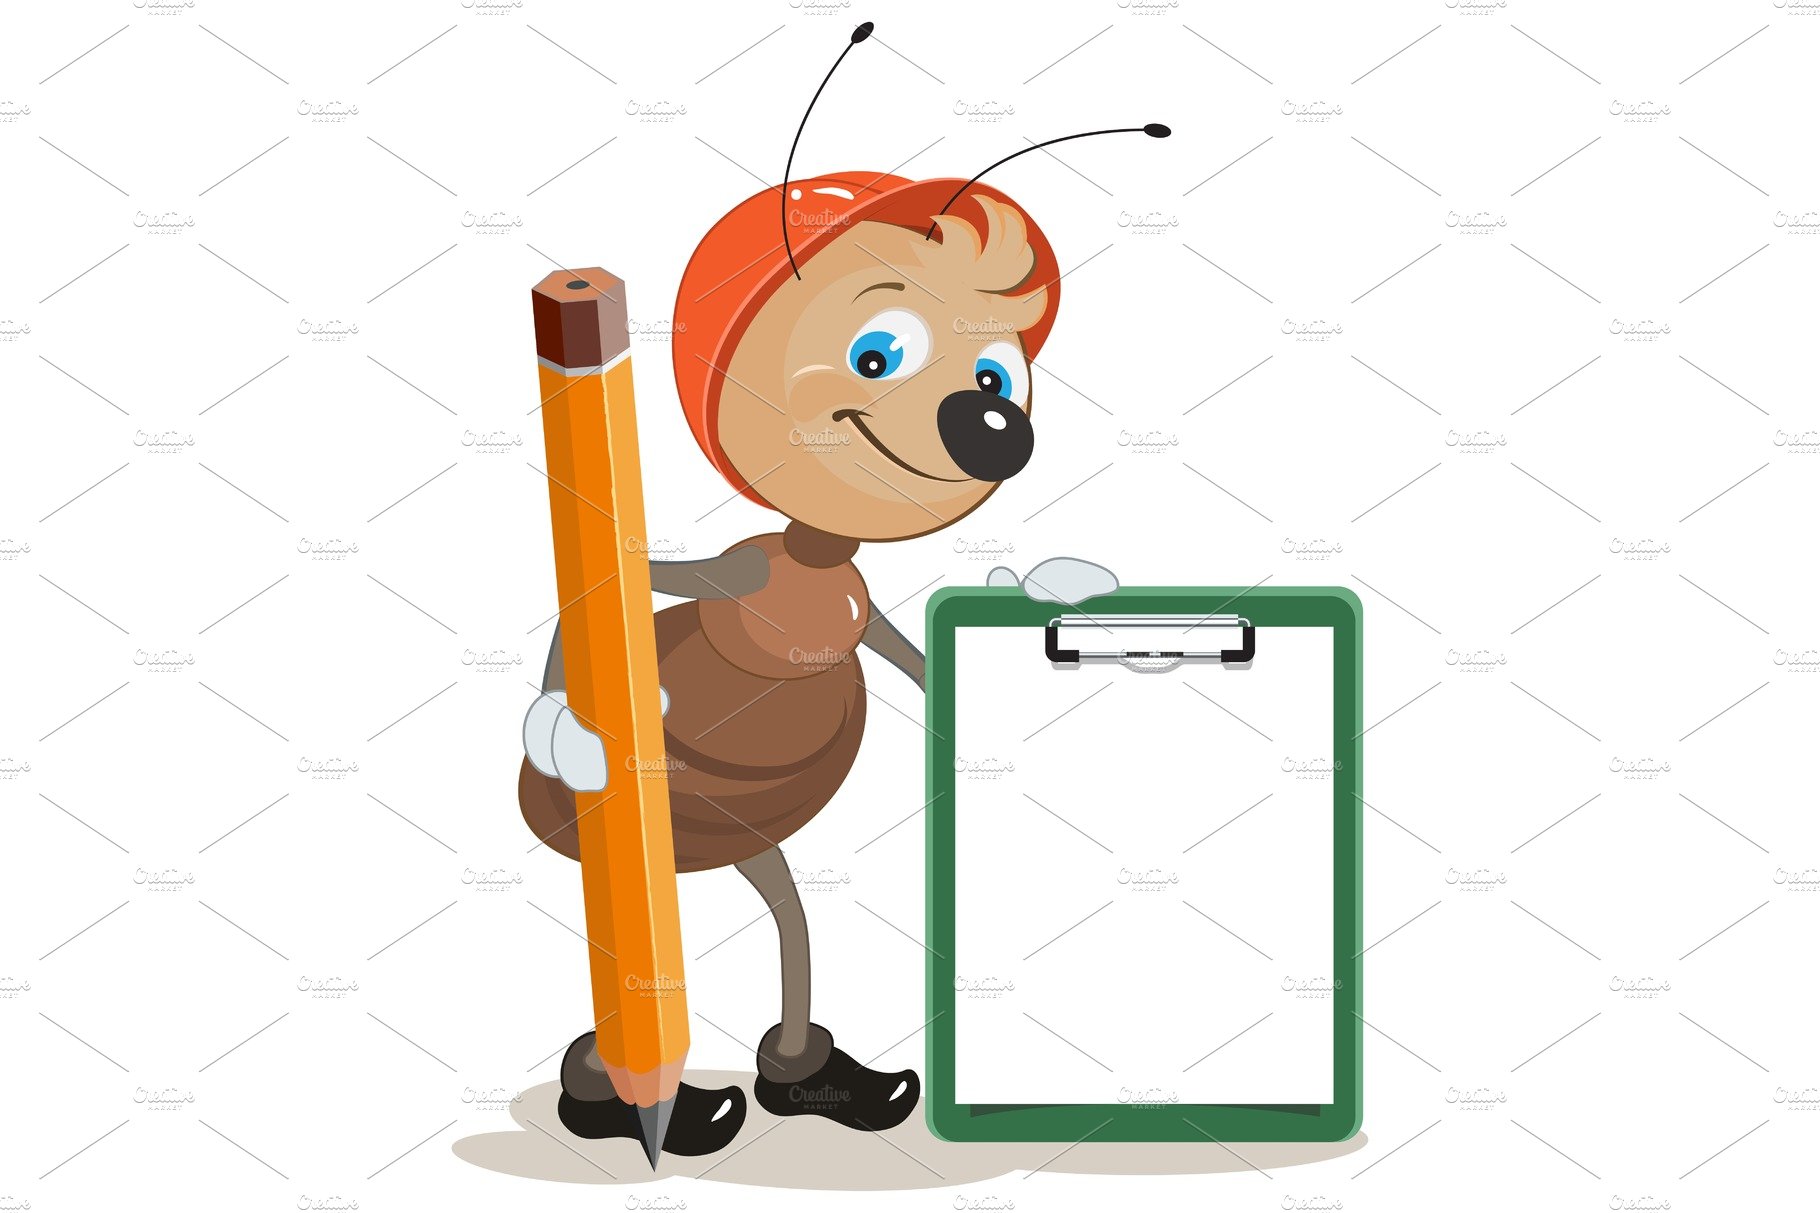 Ant builder holds clipboard and cover image.